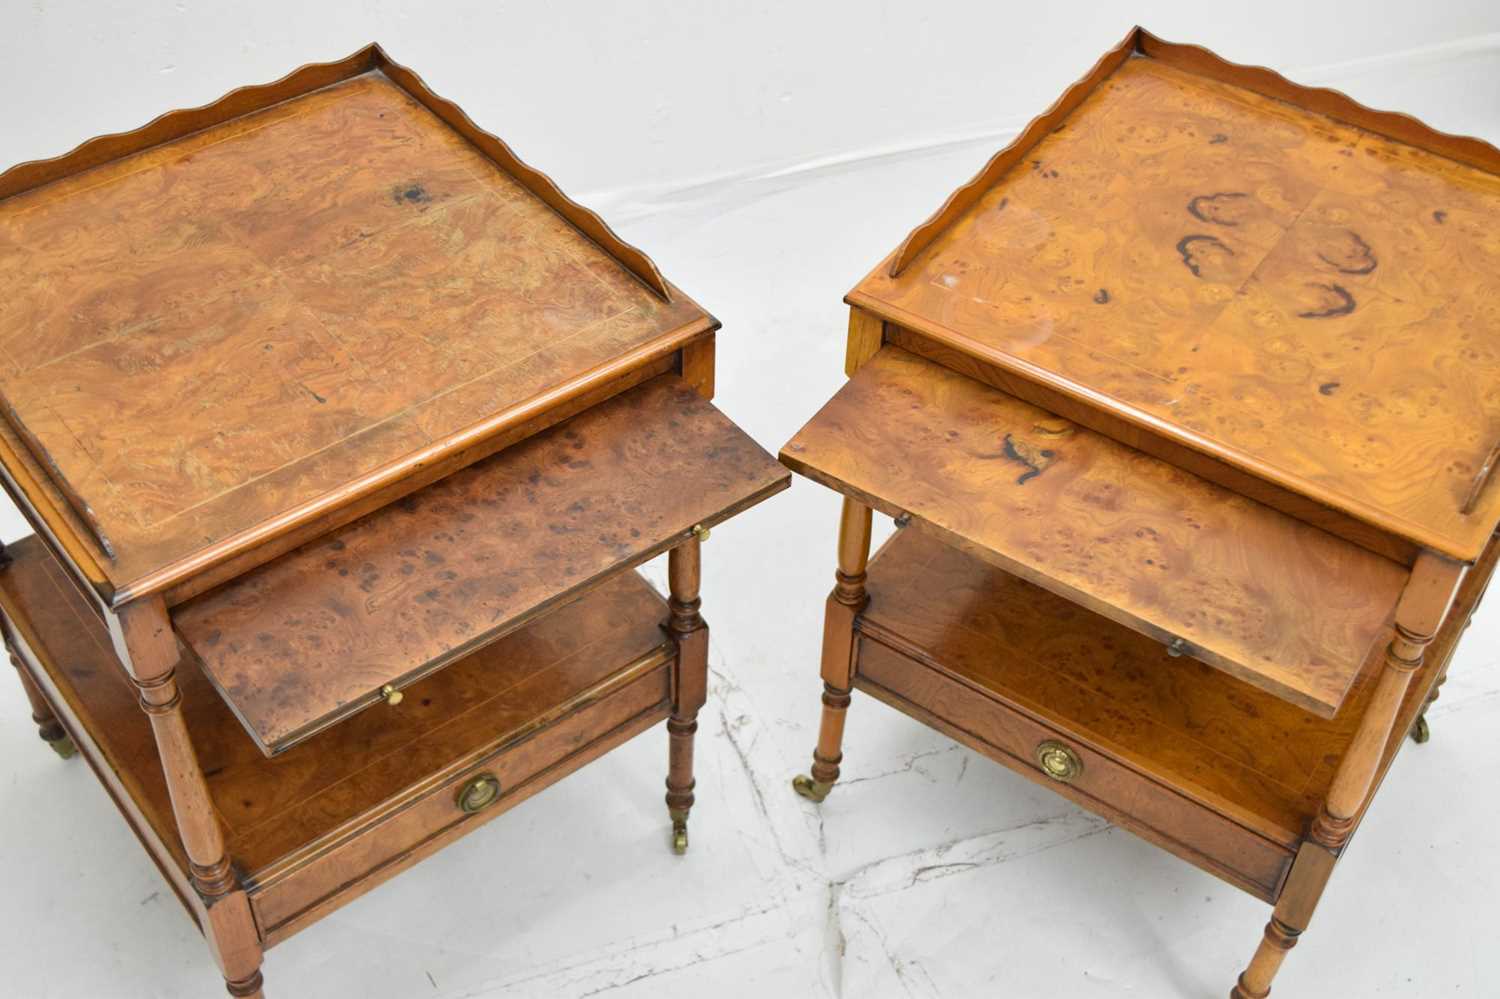 Pair of reproduction yew wood two-tier etageres - Image 8 of 9